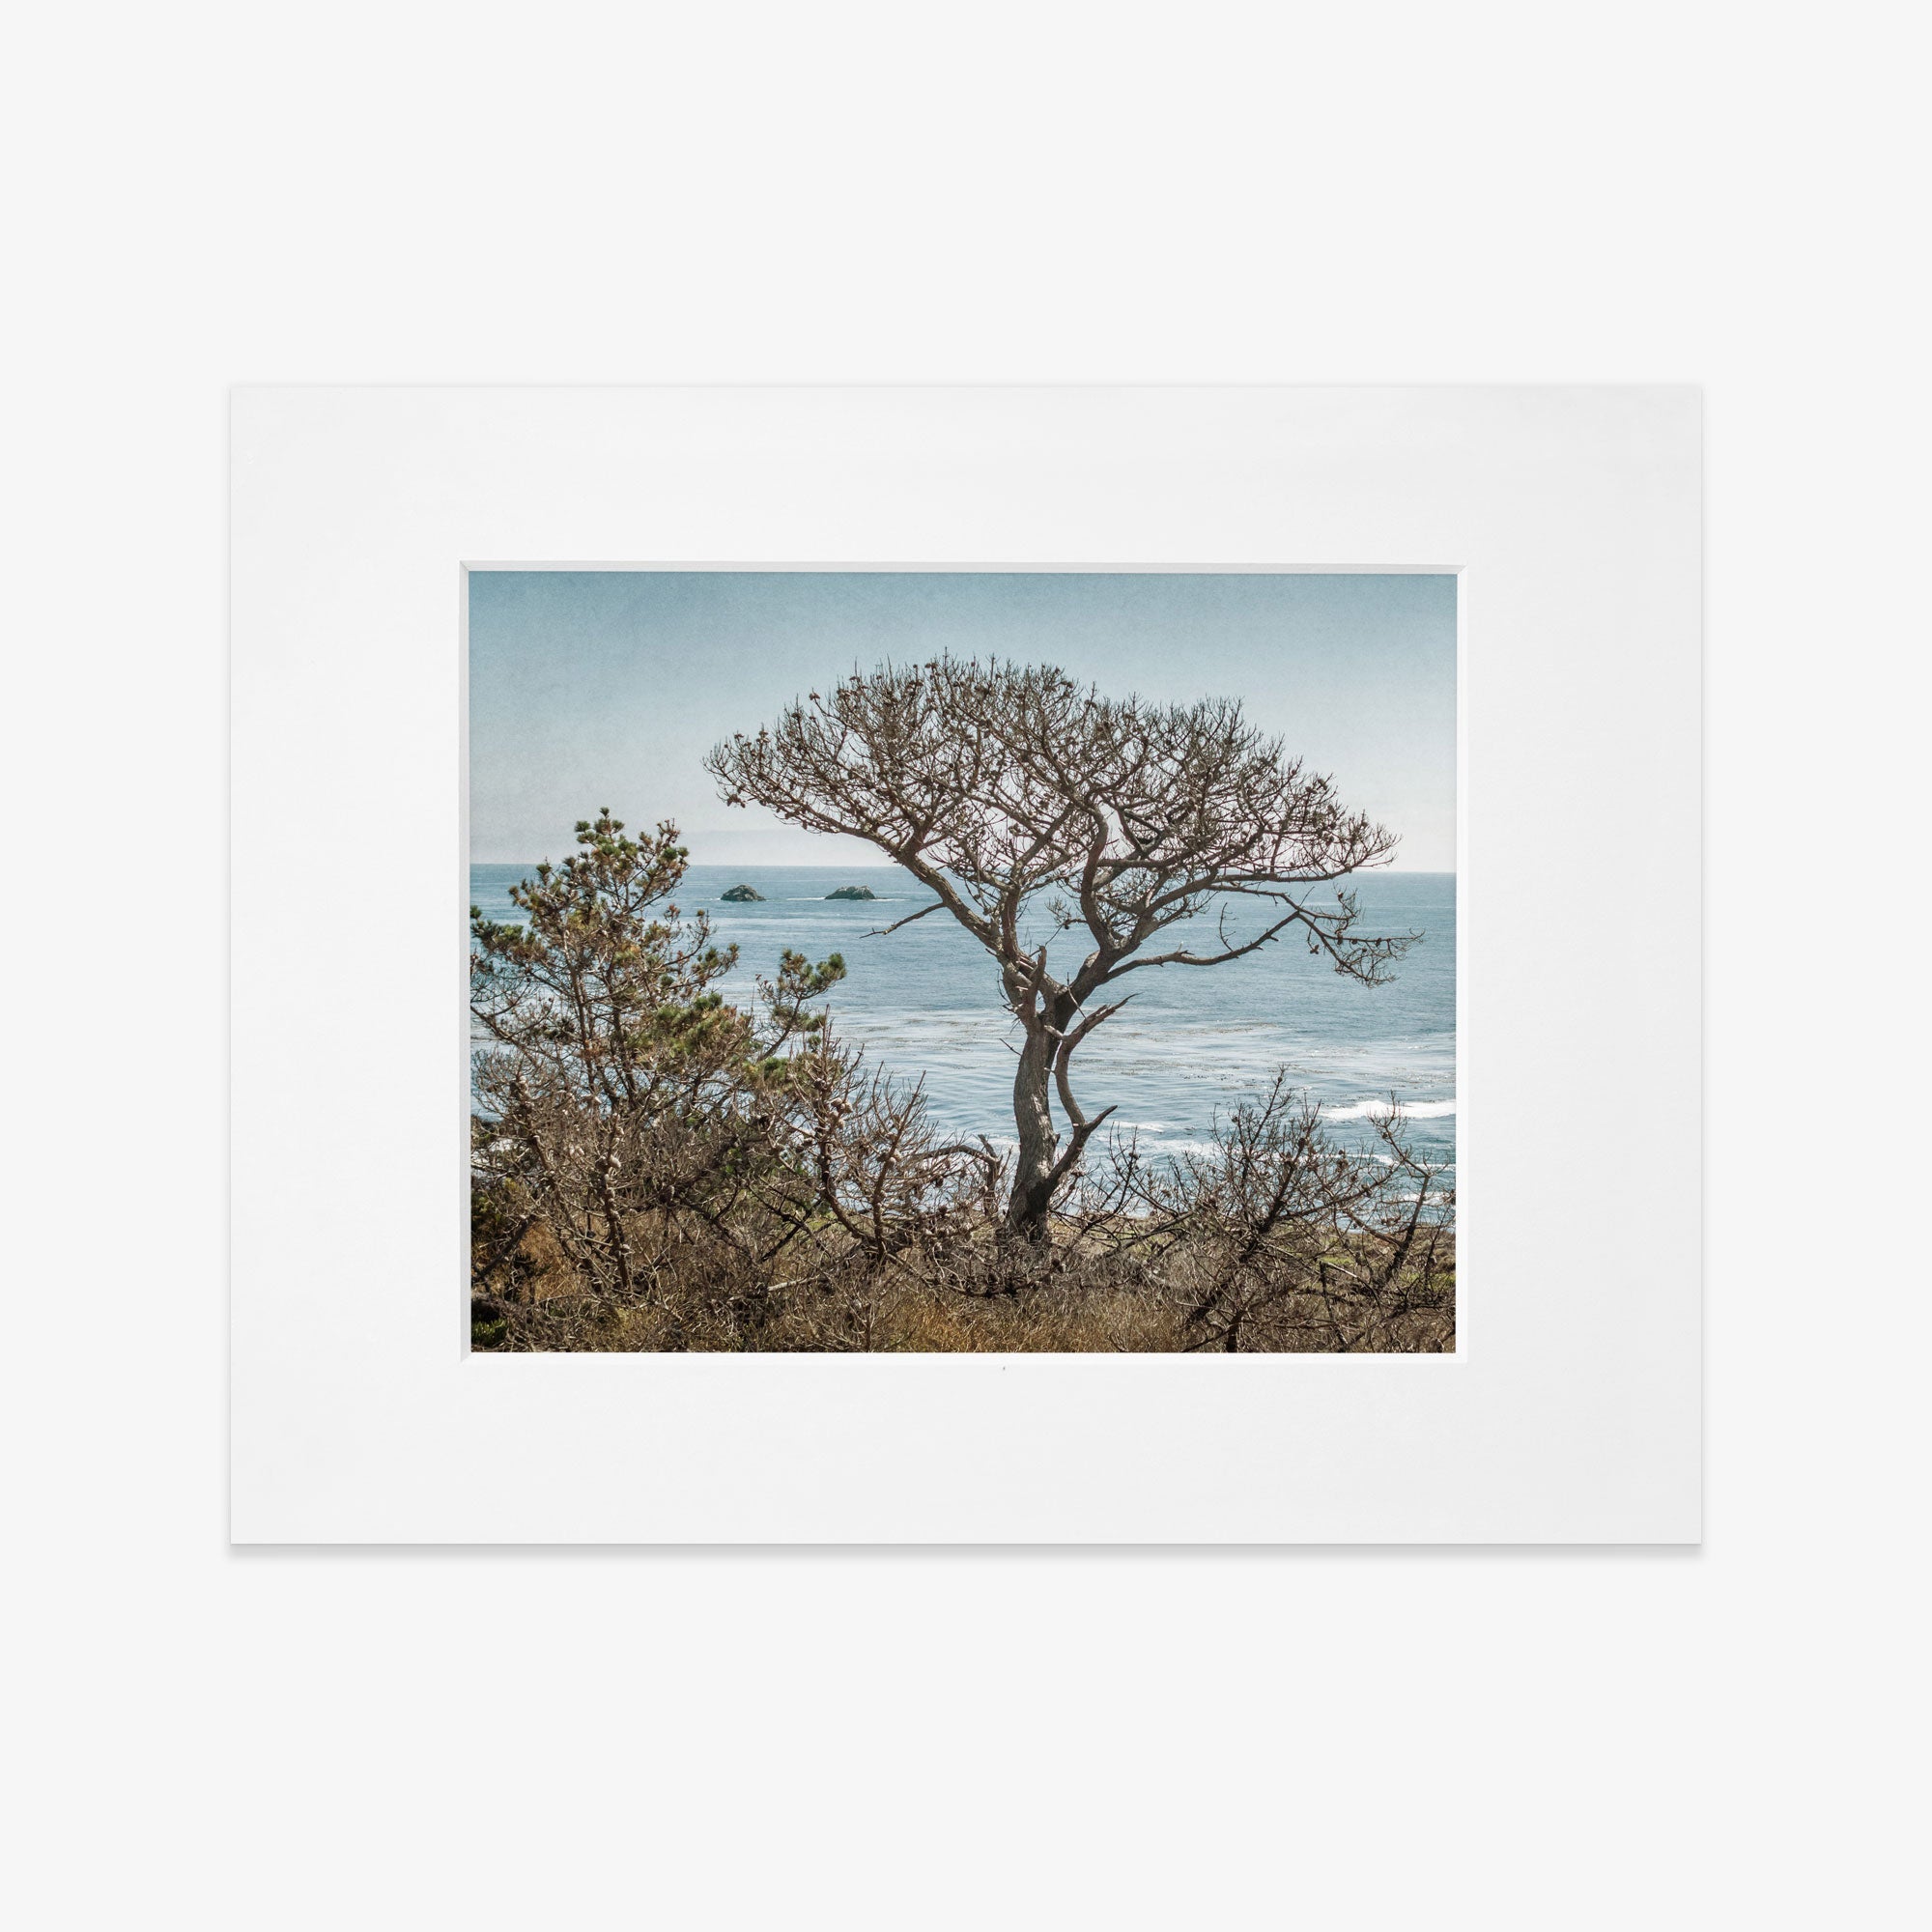 Offley Green&#39;s California Landscape Art in Big Sur, &#39;Wind Blown Tree&#39; captured on archival photographic paper depicts a windswept tree by the sea, with distant islands visible in the background, on a clear day.